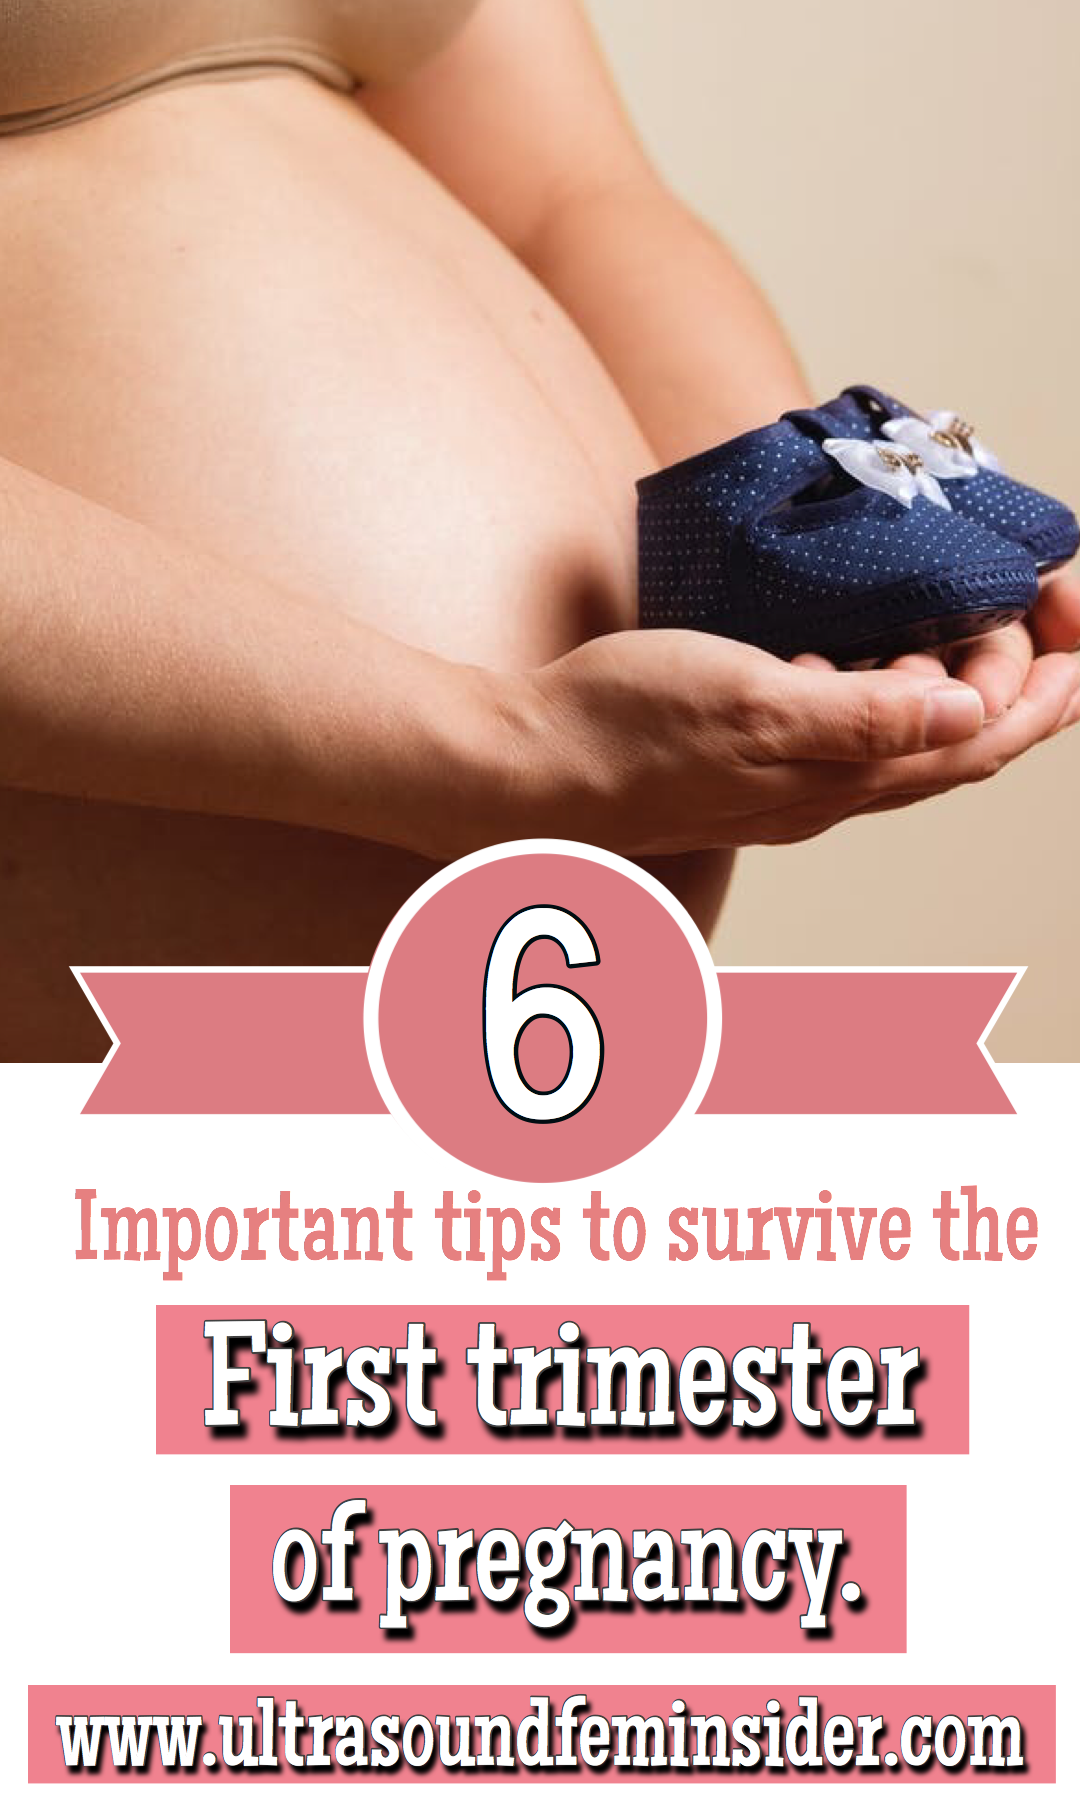 Helpful tips for dealing with the first trimester of pregnancy.